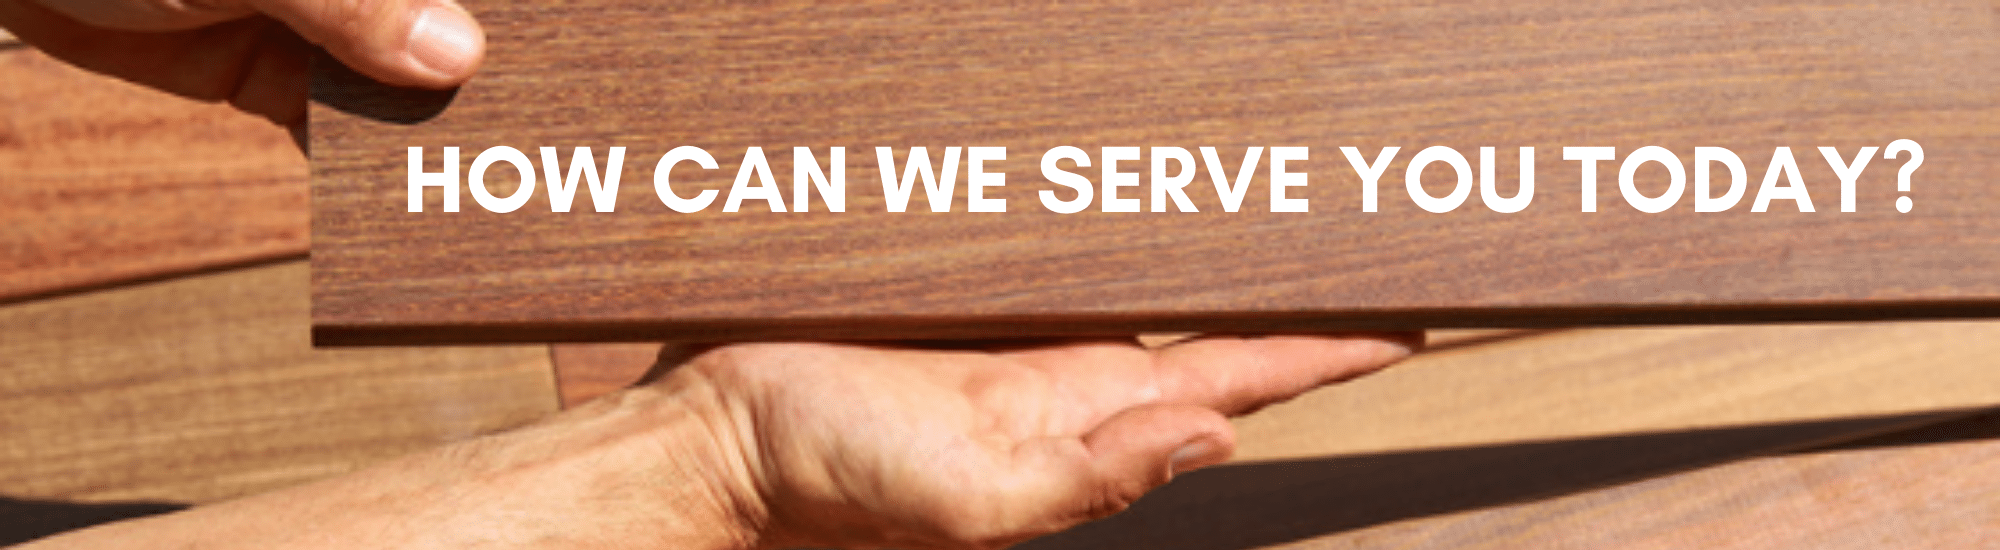 how can we serve you today